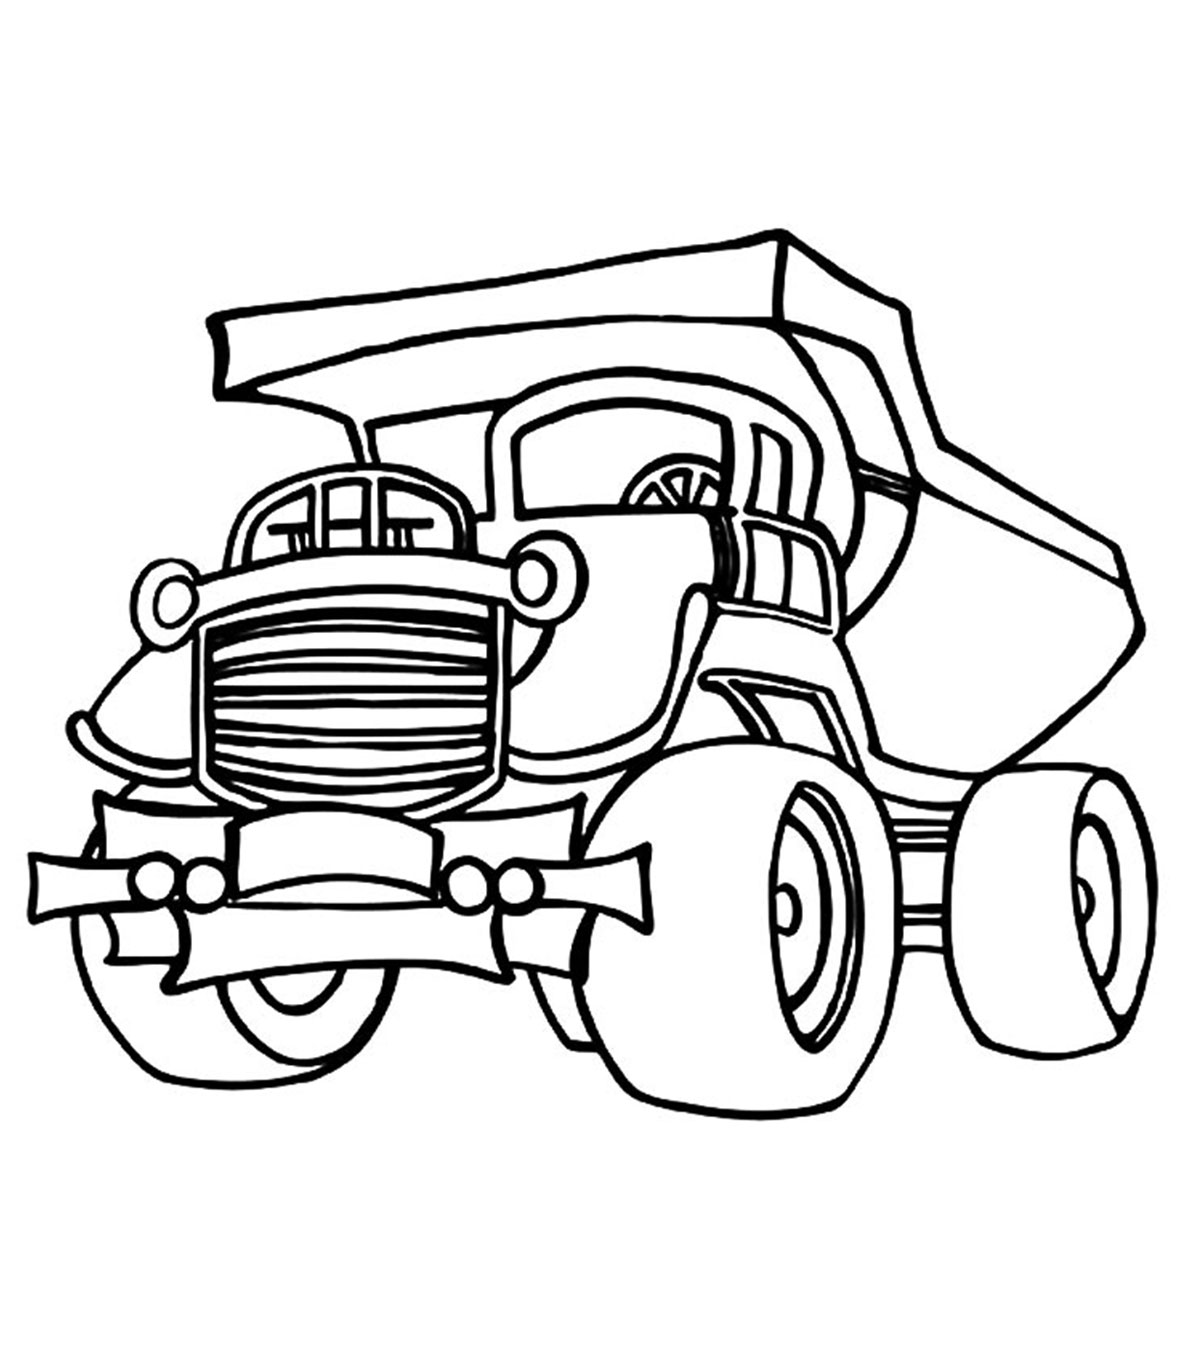 Top 10 Dump Truck Coloring Pages For Your Toddlers